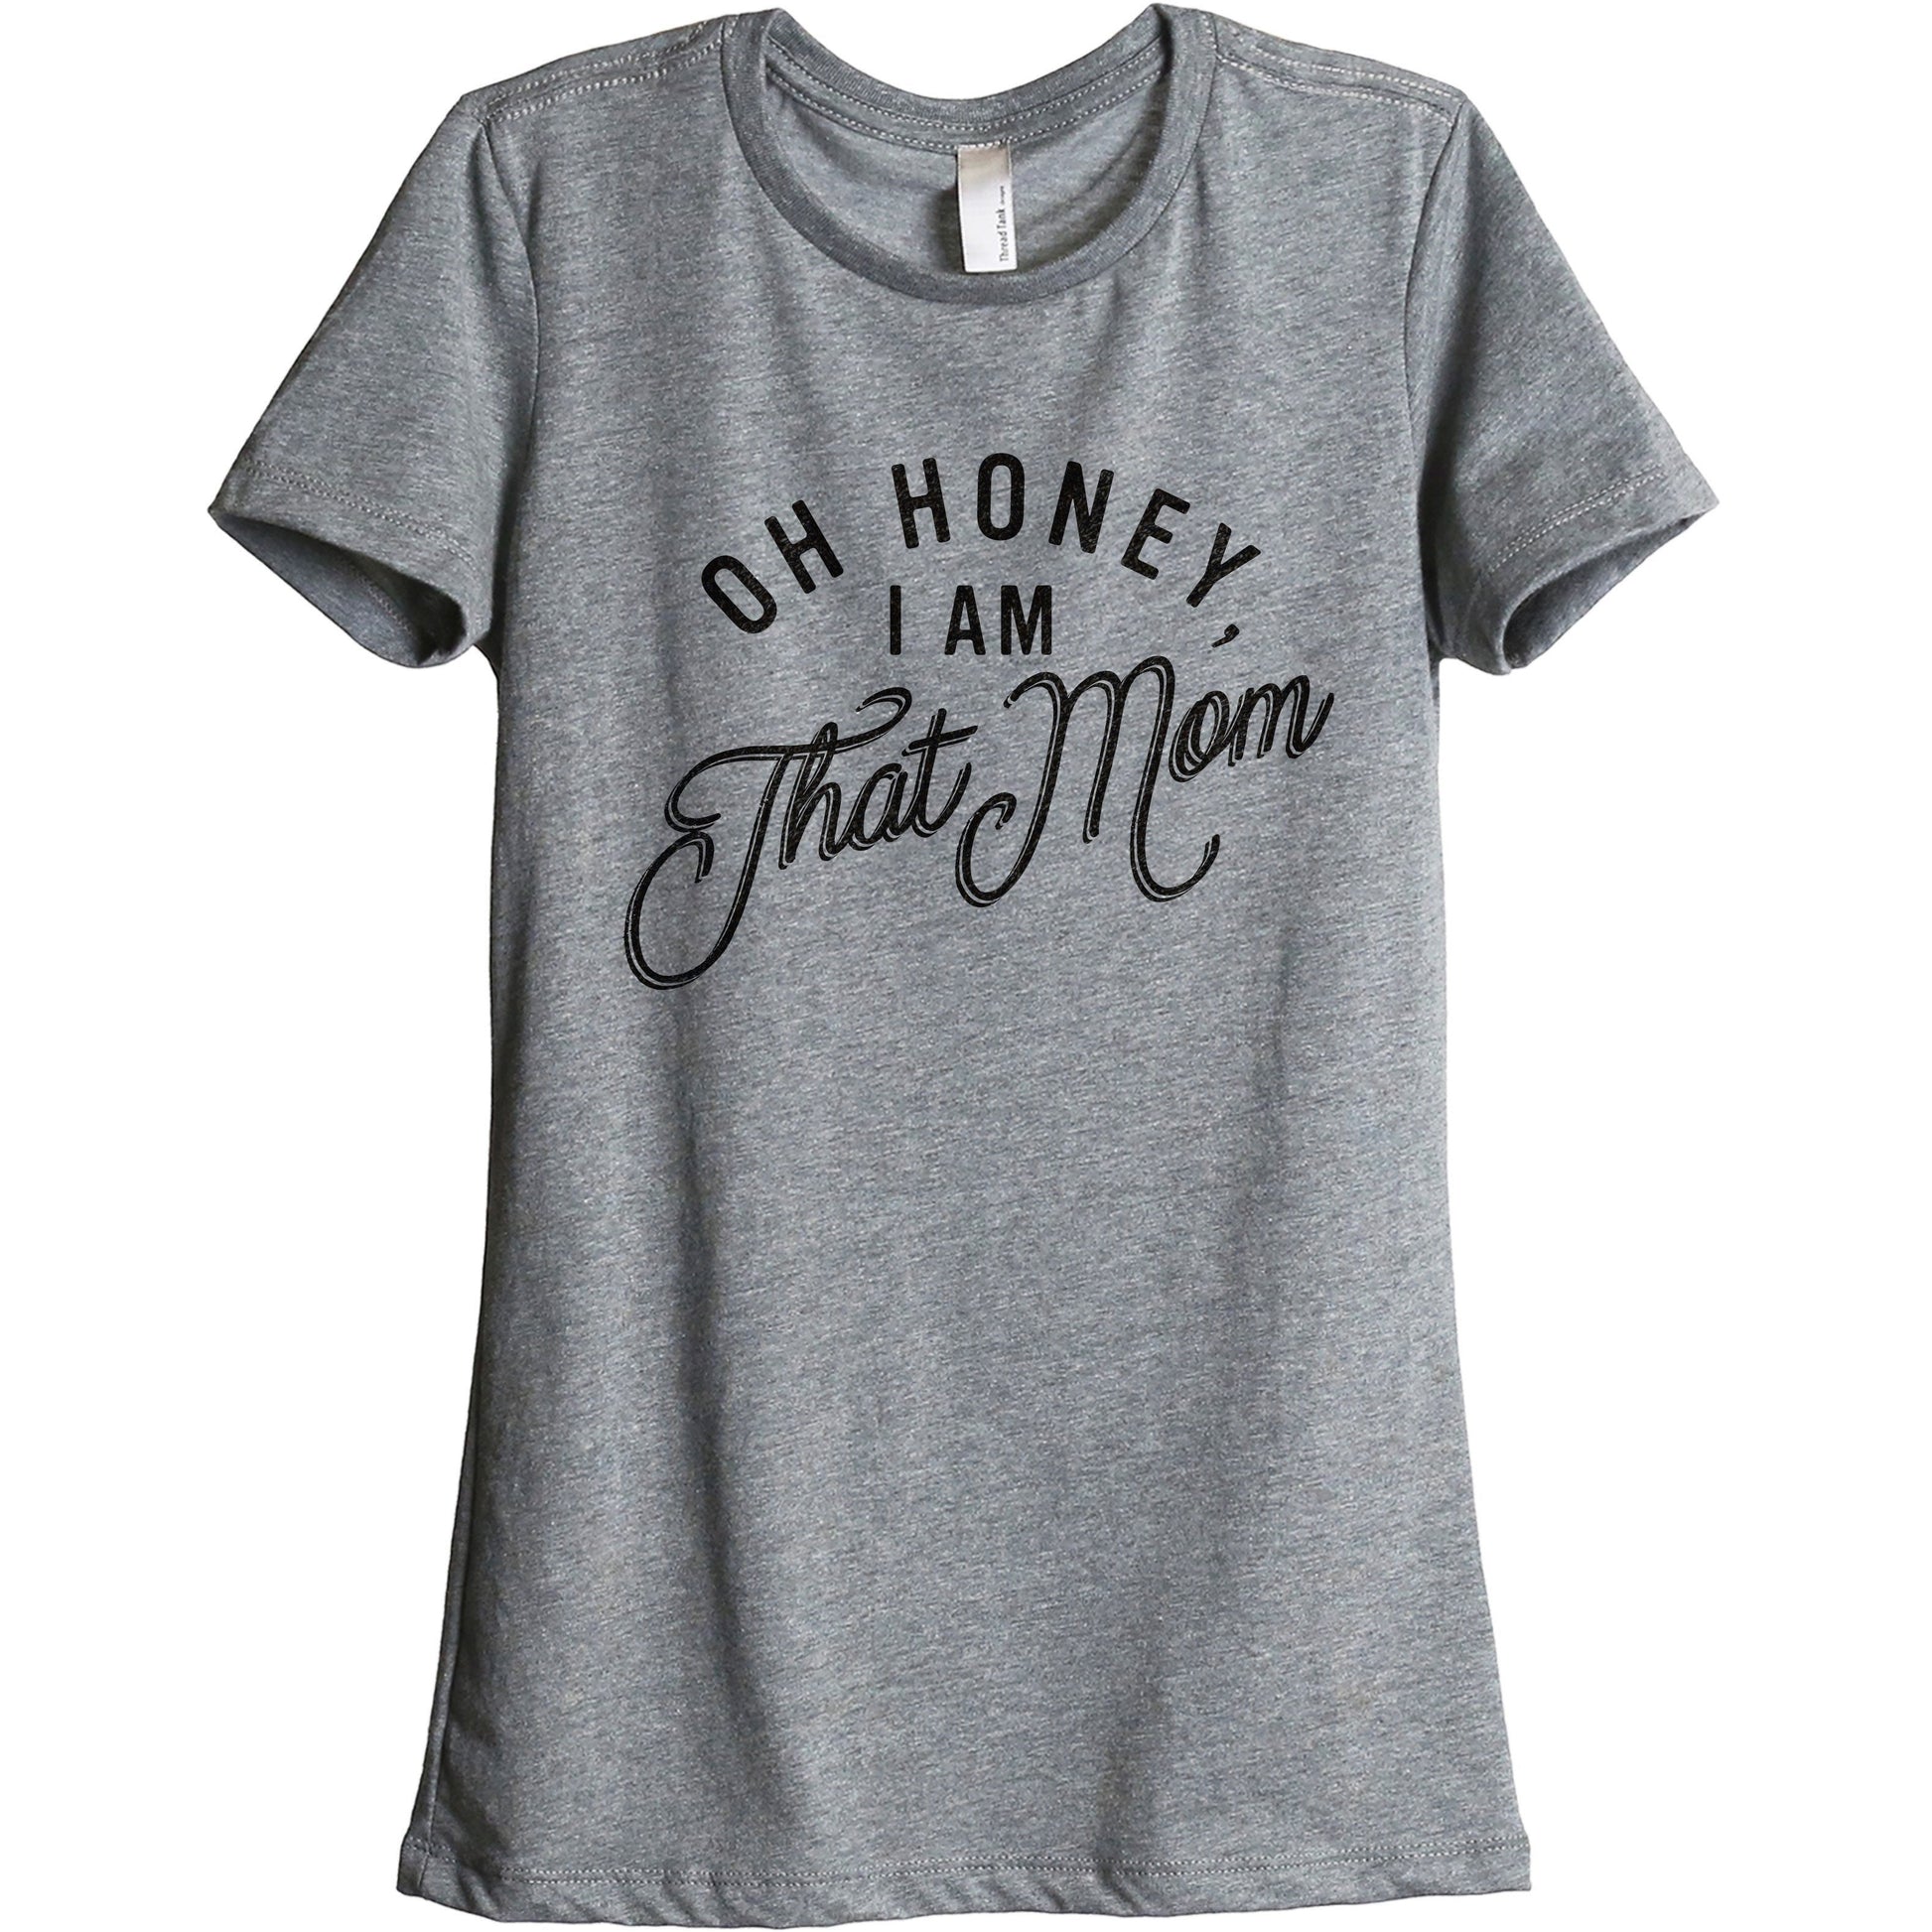 Oh Honey, I Am That Mom - Stories You Can Wear by Thread Tank